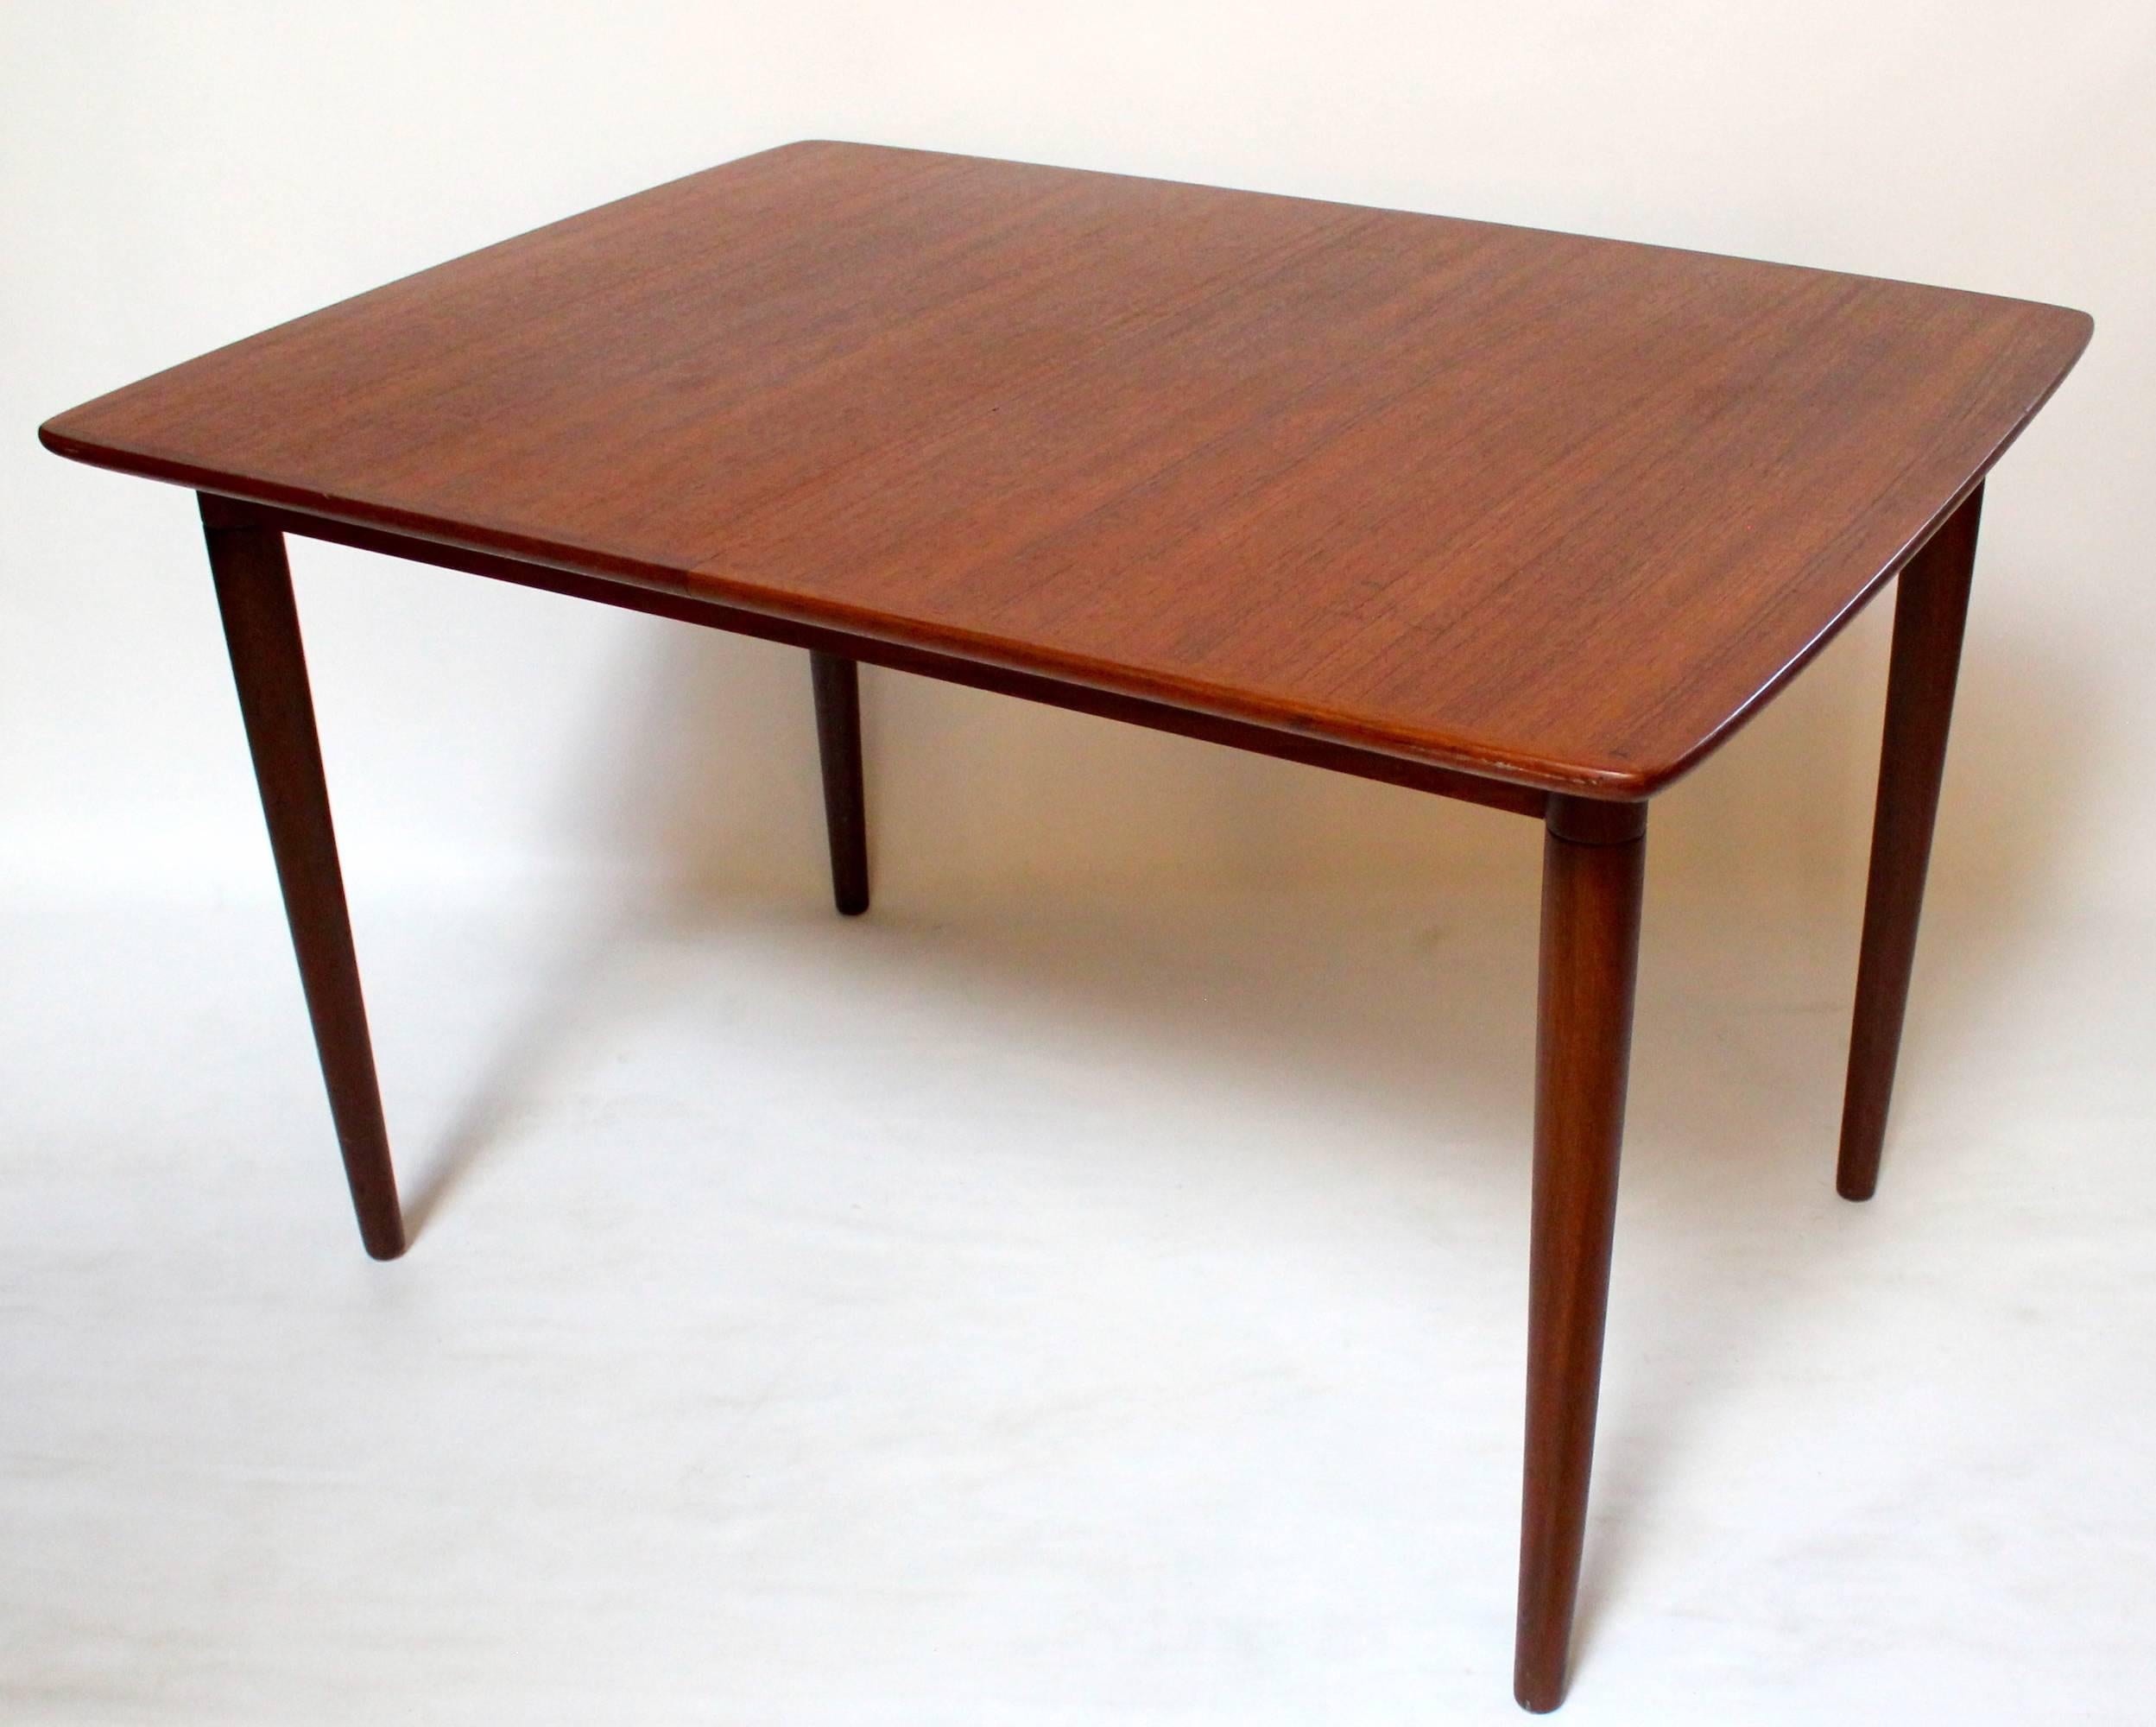 1960s Danish Modern Teak Dining Table with Two Leaves 1